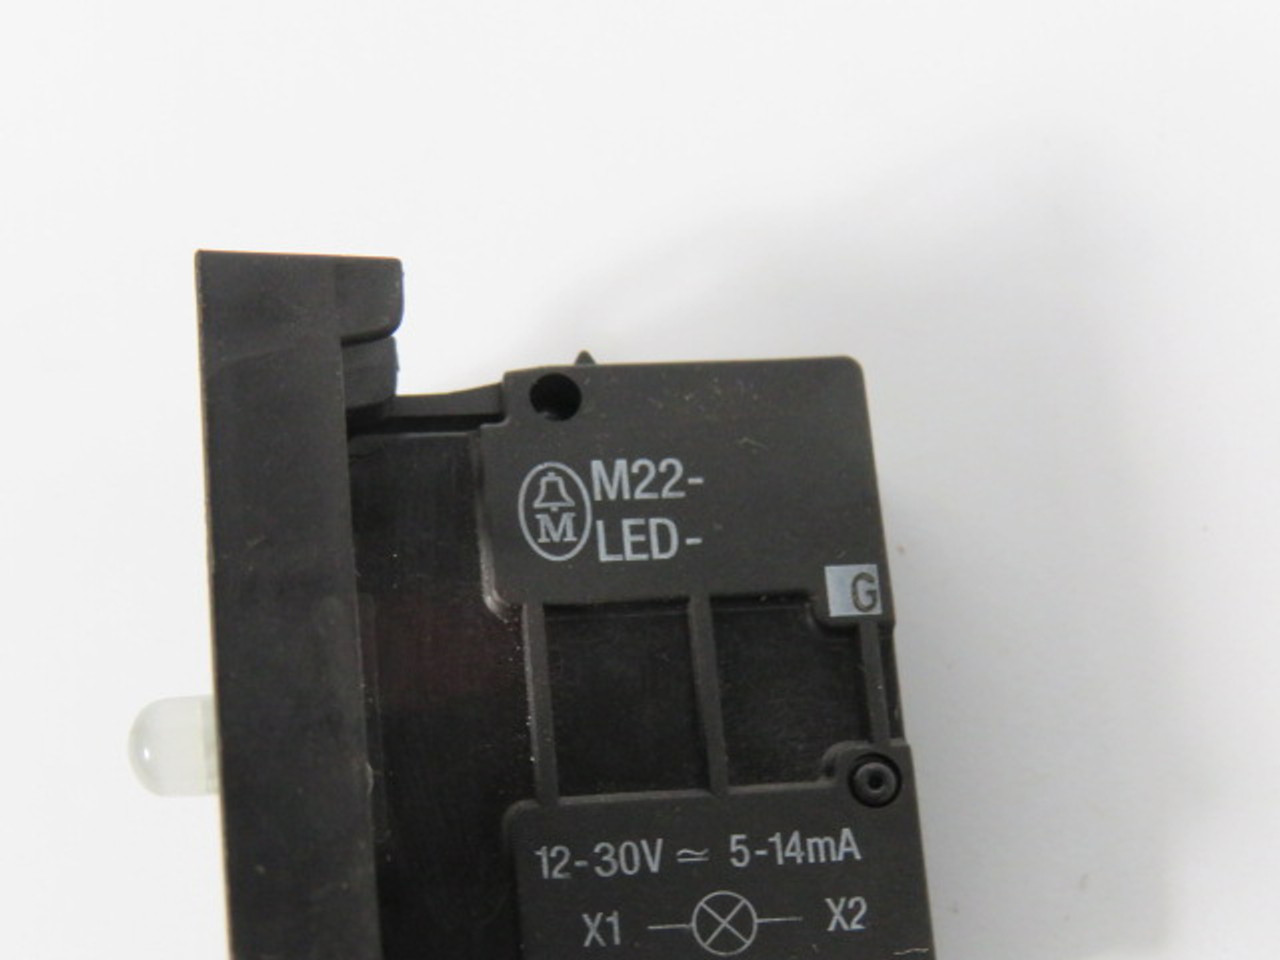 Moeller M22-LED-G Contact Block w/ Mounting Latch 12-30V 5-14mA USED